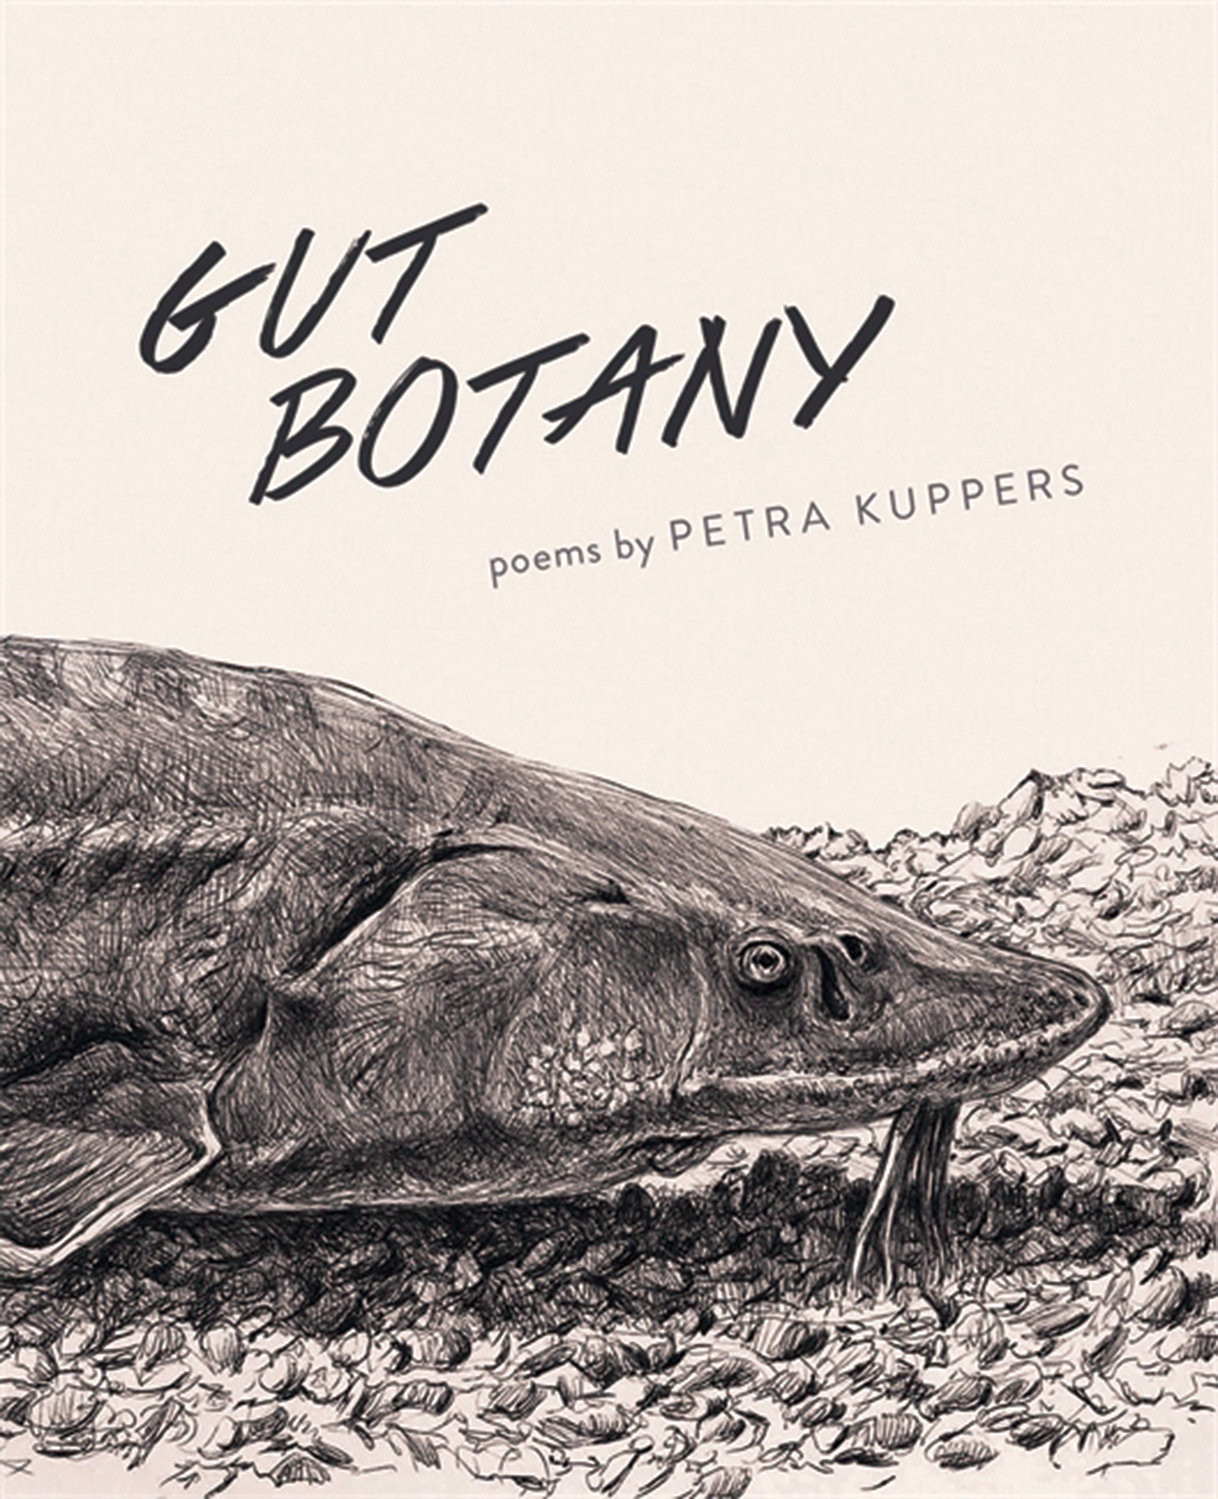 The cover of Petra Kuppers’ “Gut Botany” book of collected poems, complete with sturgeon portrait.